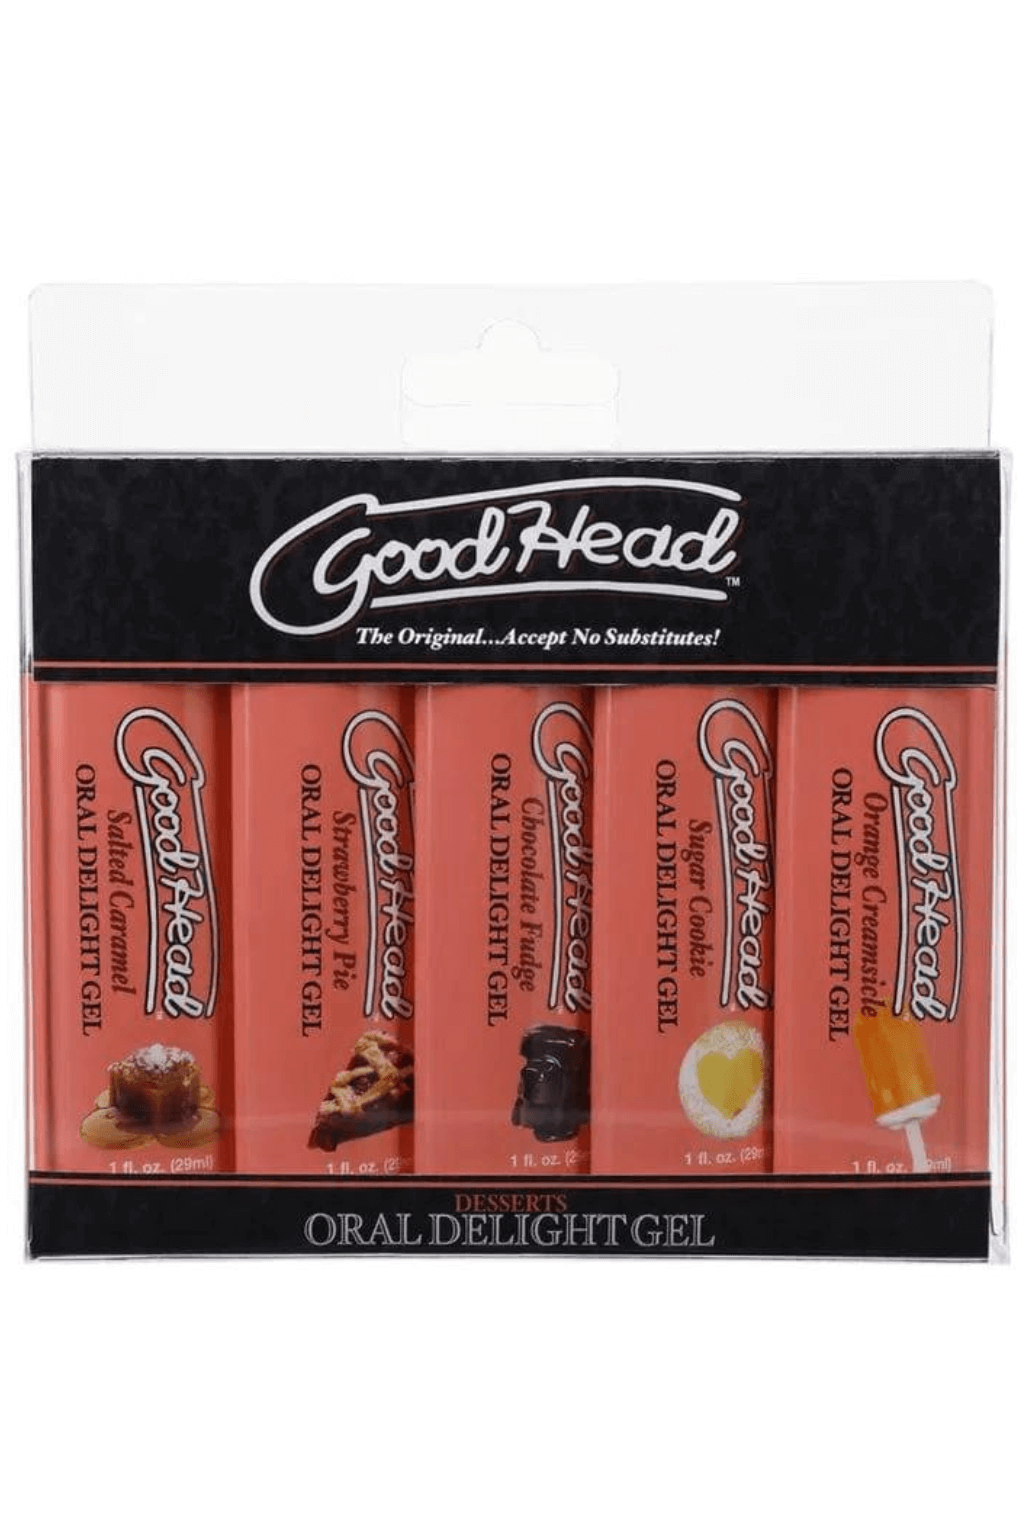 GoodHead Oral Delight Gel - Desserts - $32.00 - - Naked Curve